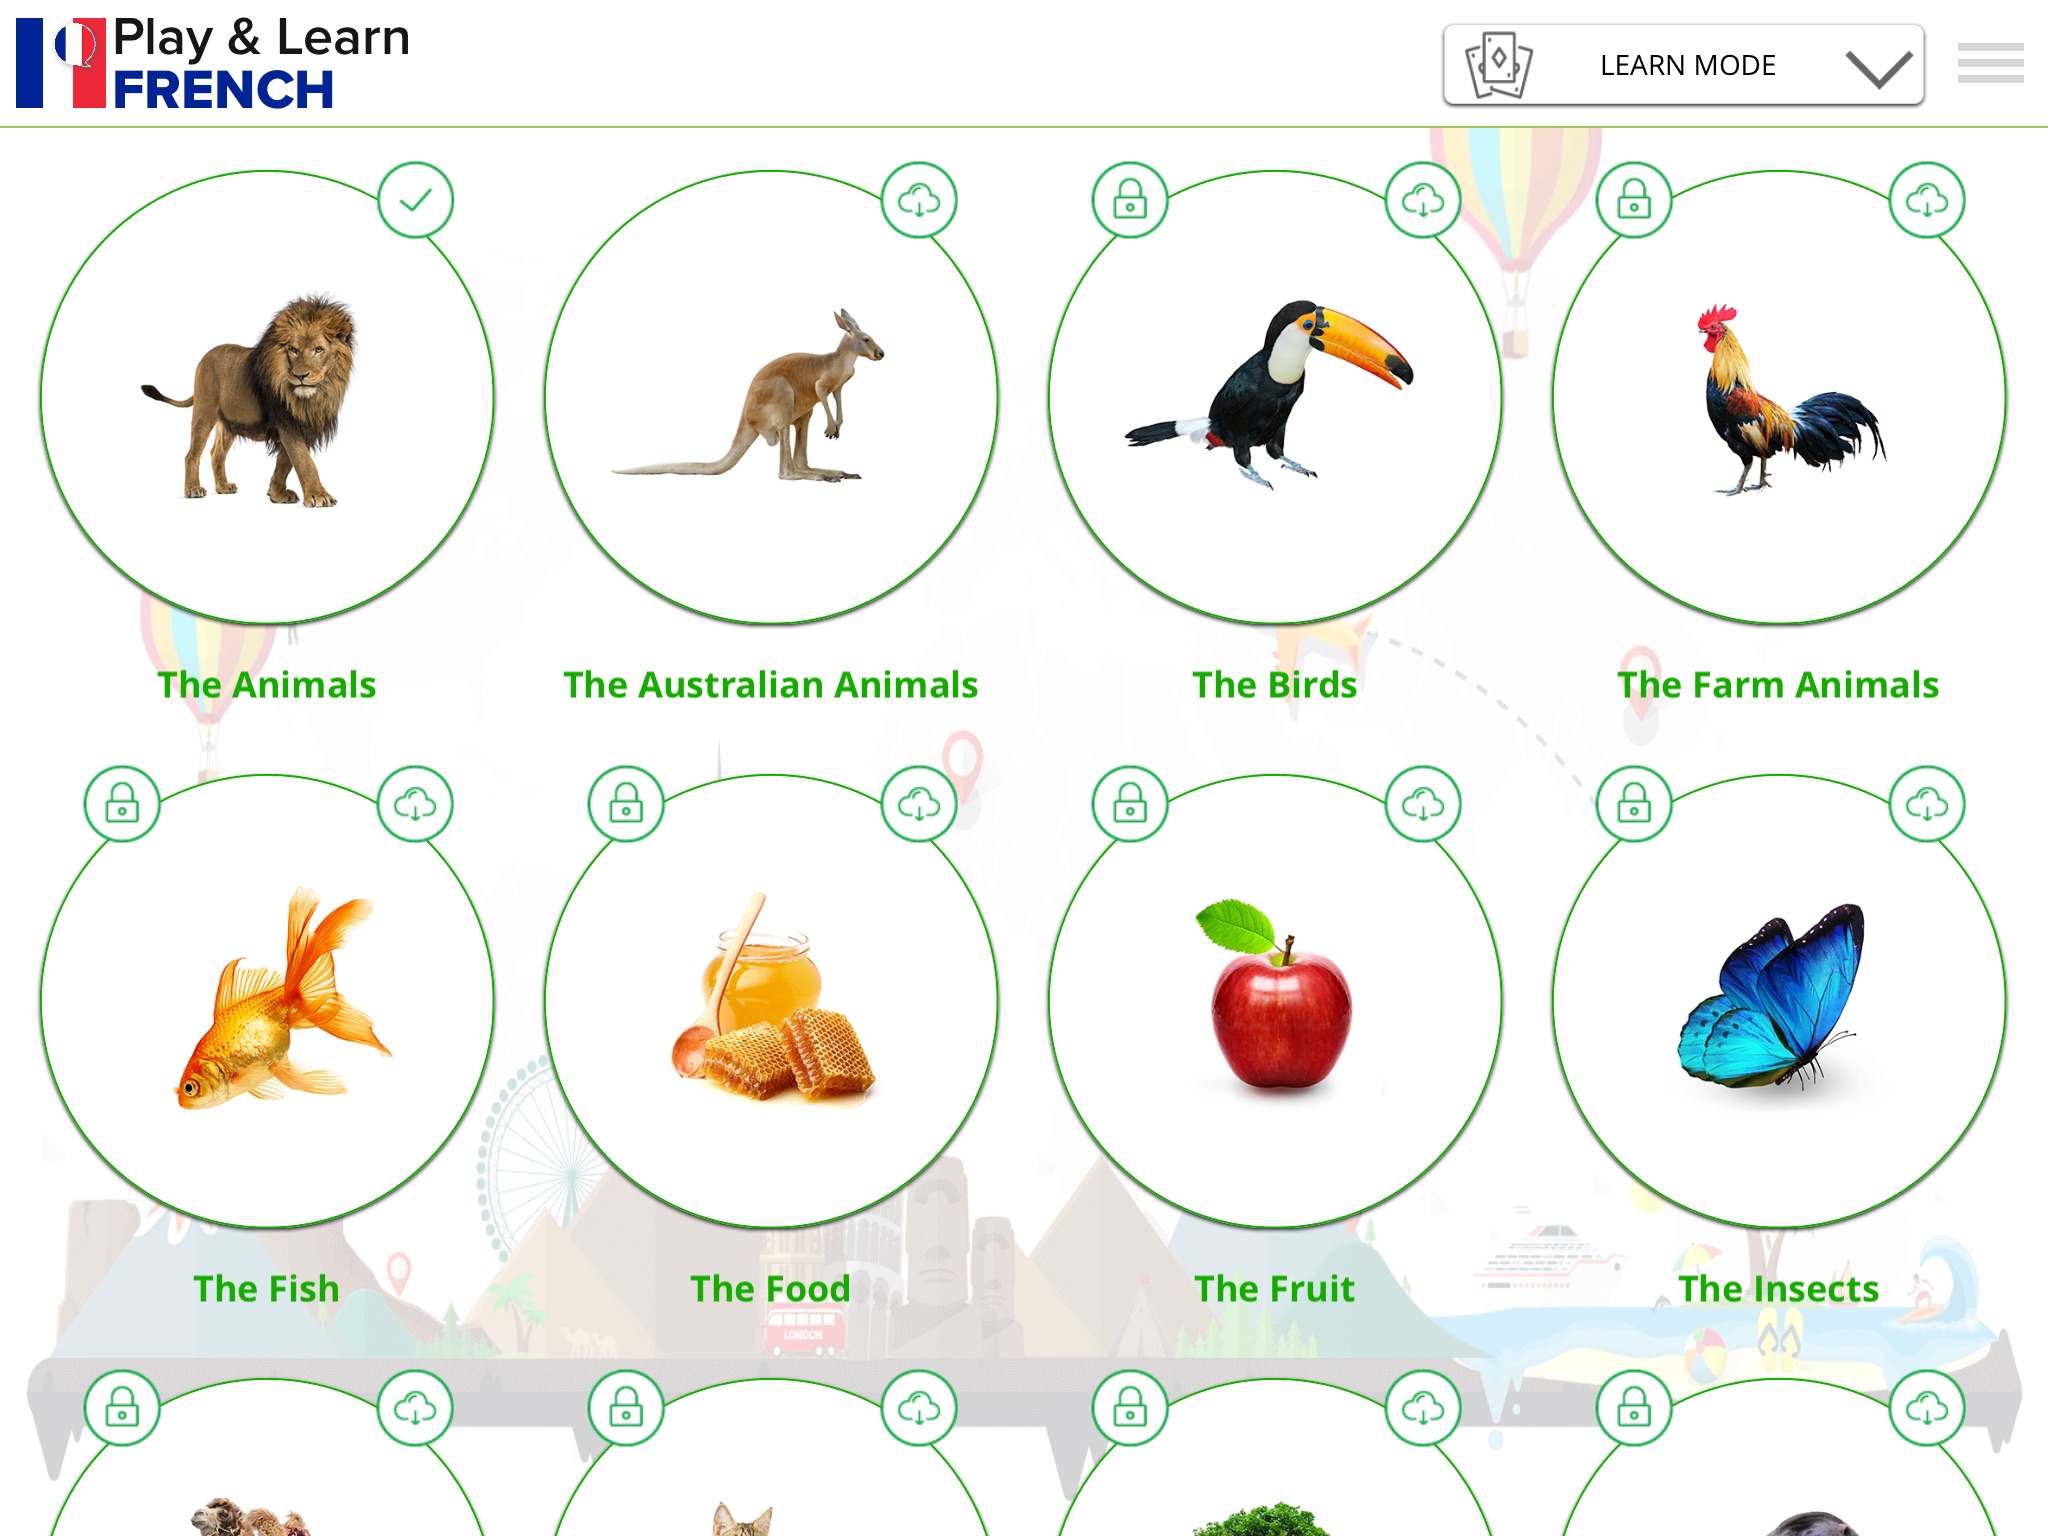 Play and Learn FRENCH - Language App screenshot 2